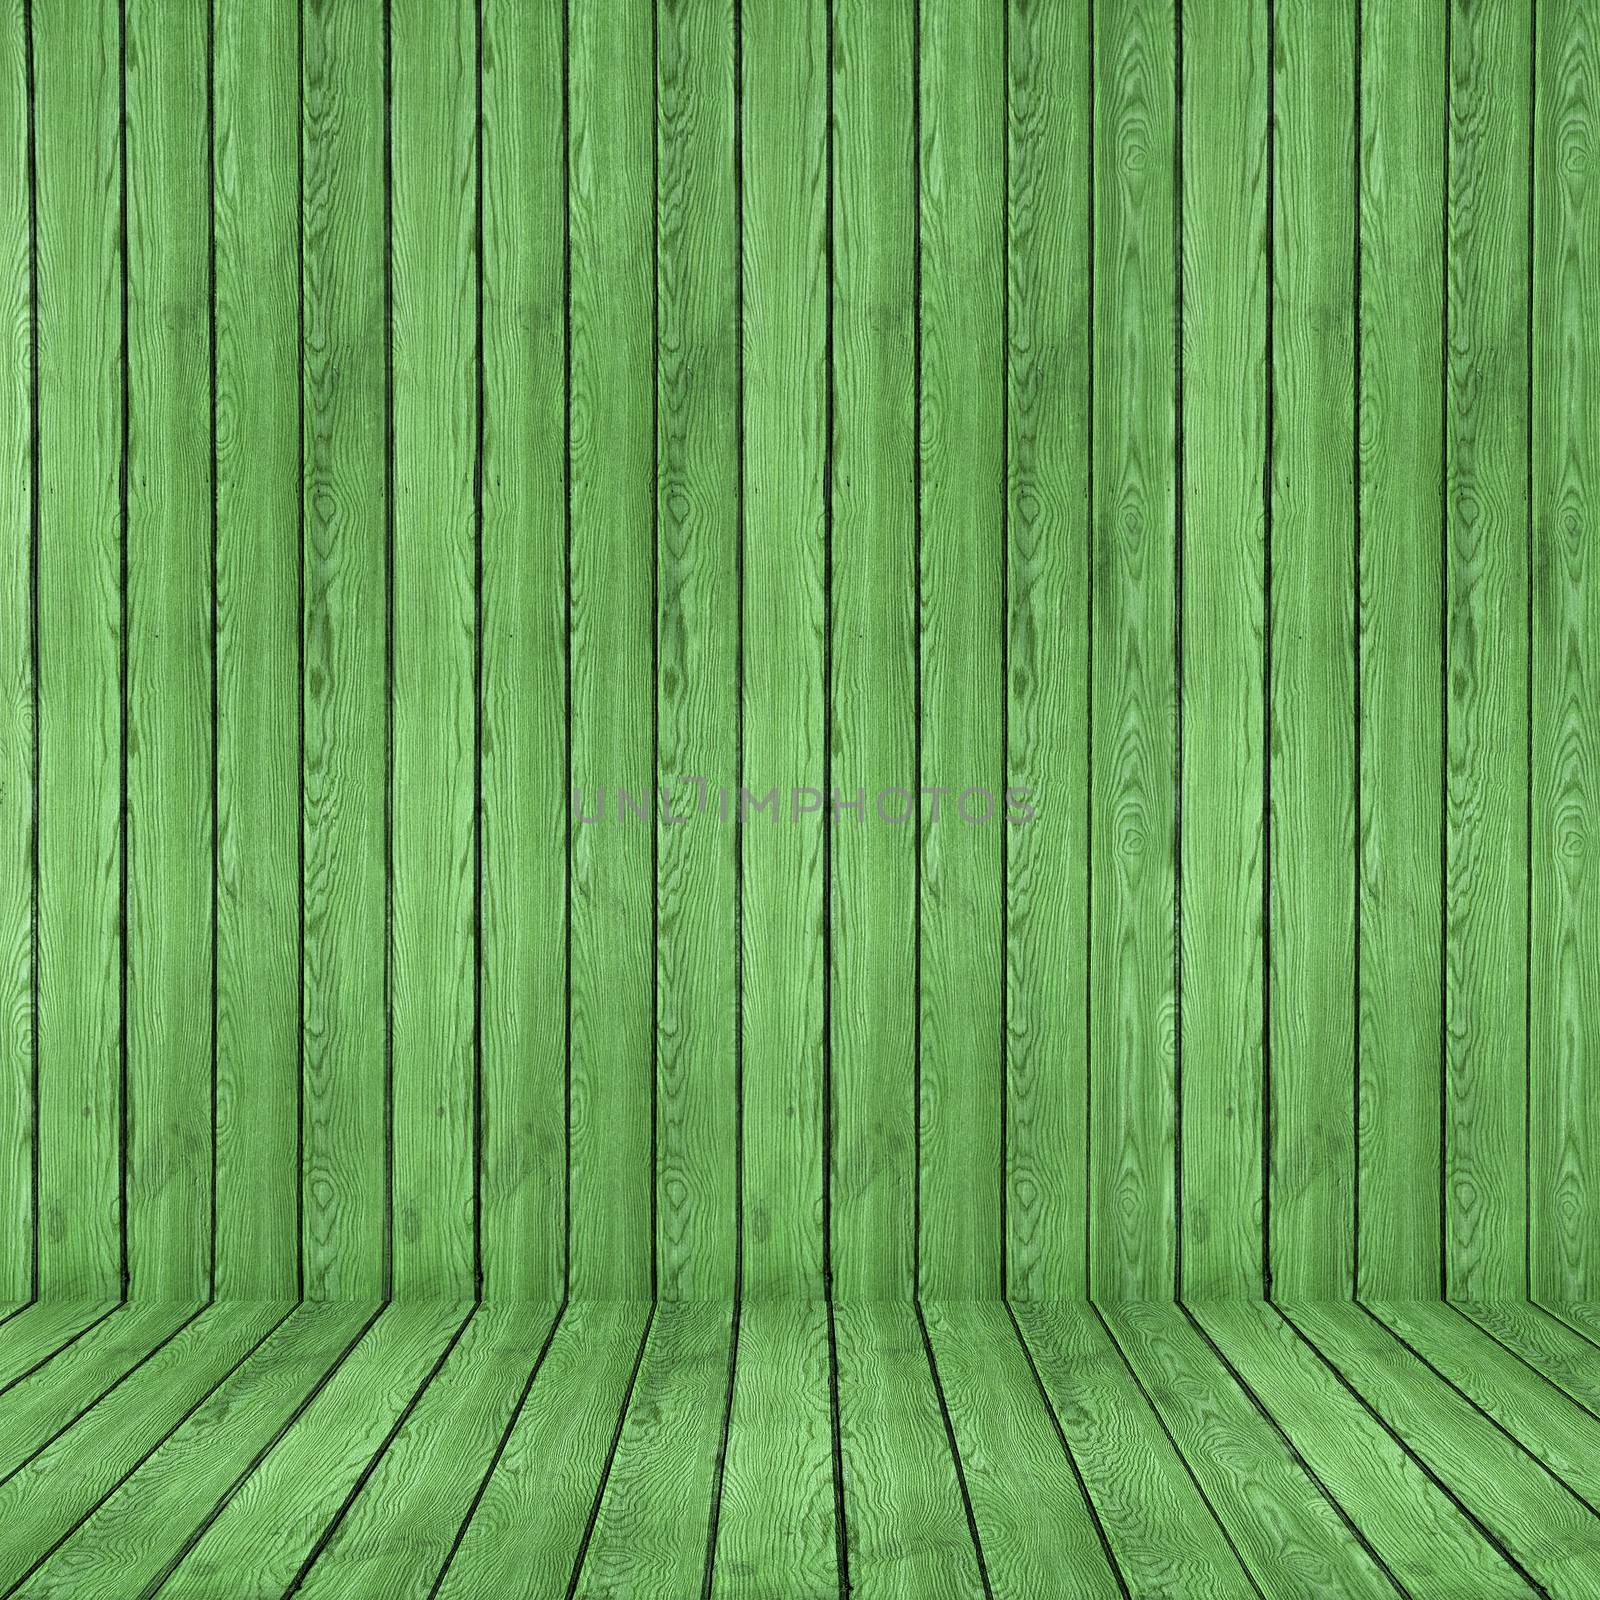 Wood texture background. green wood wall and floor.